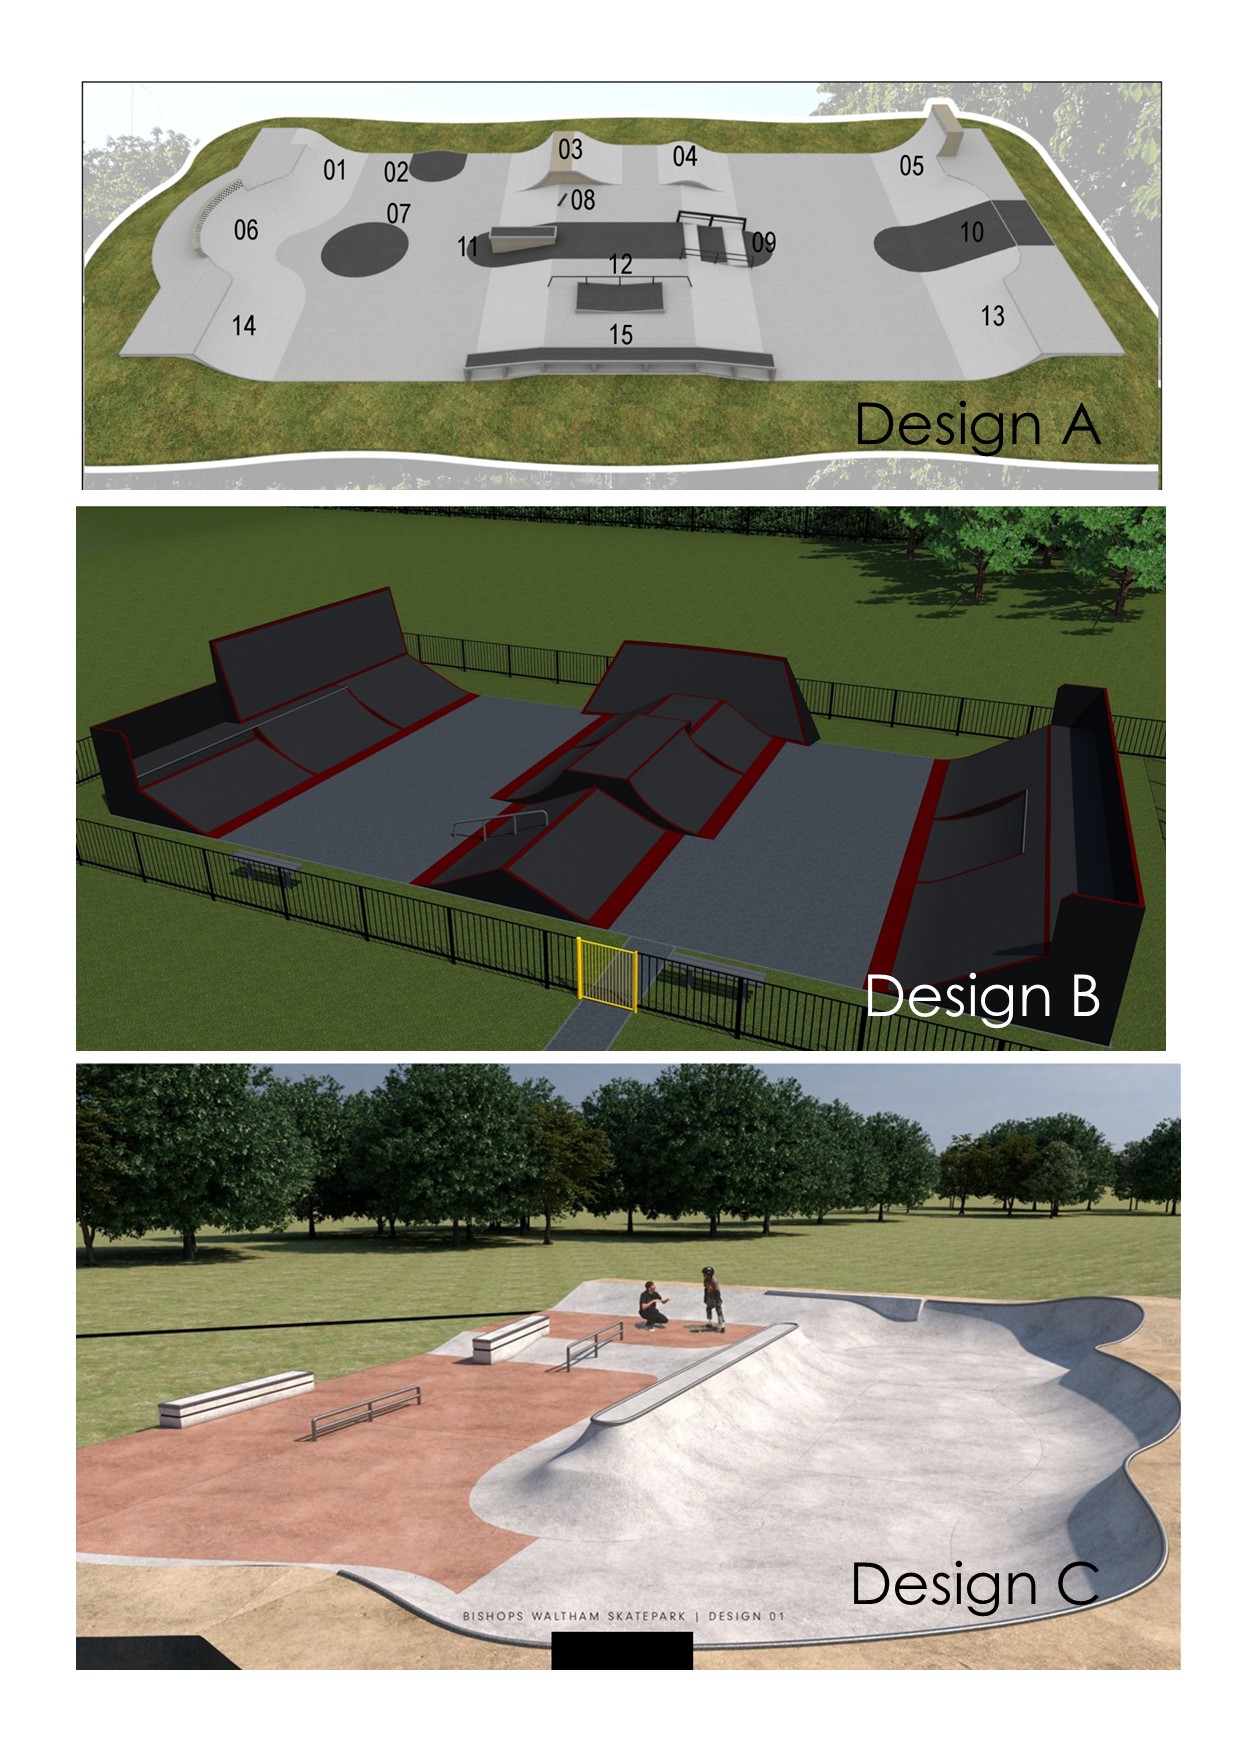 Public Display of Skatepark Designs for the site at Priory Park